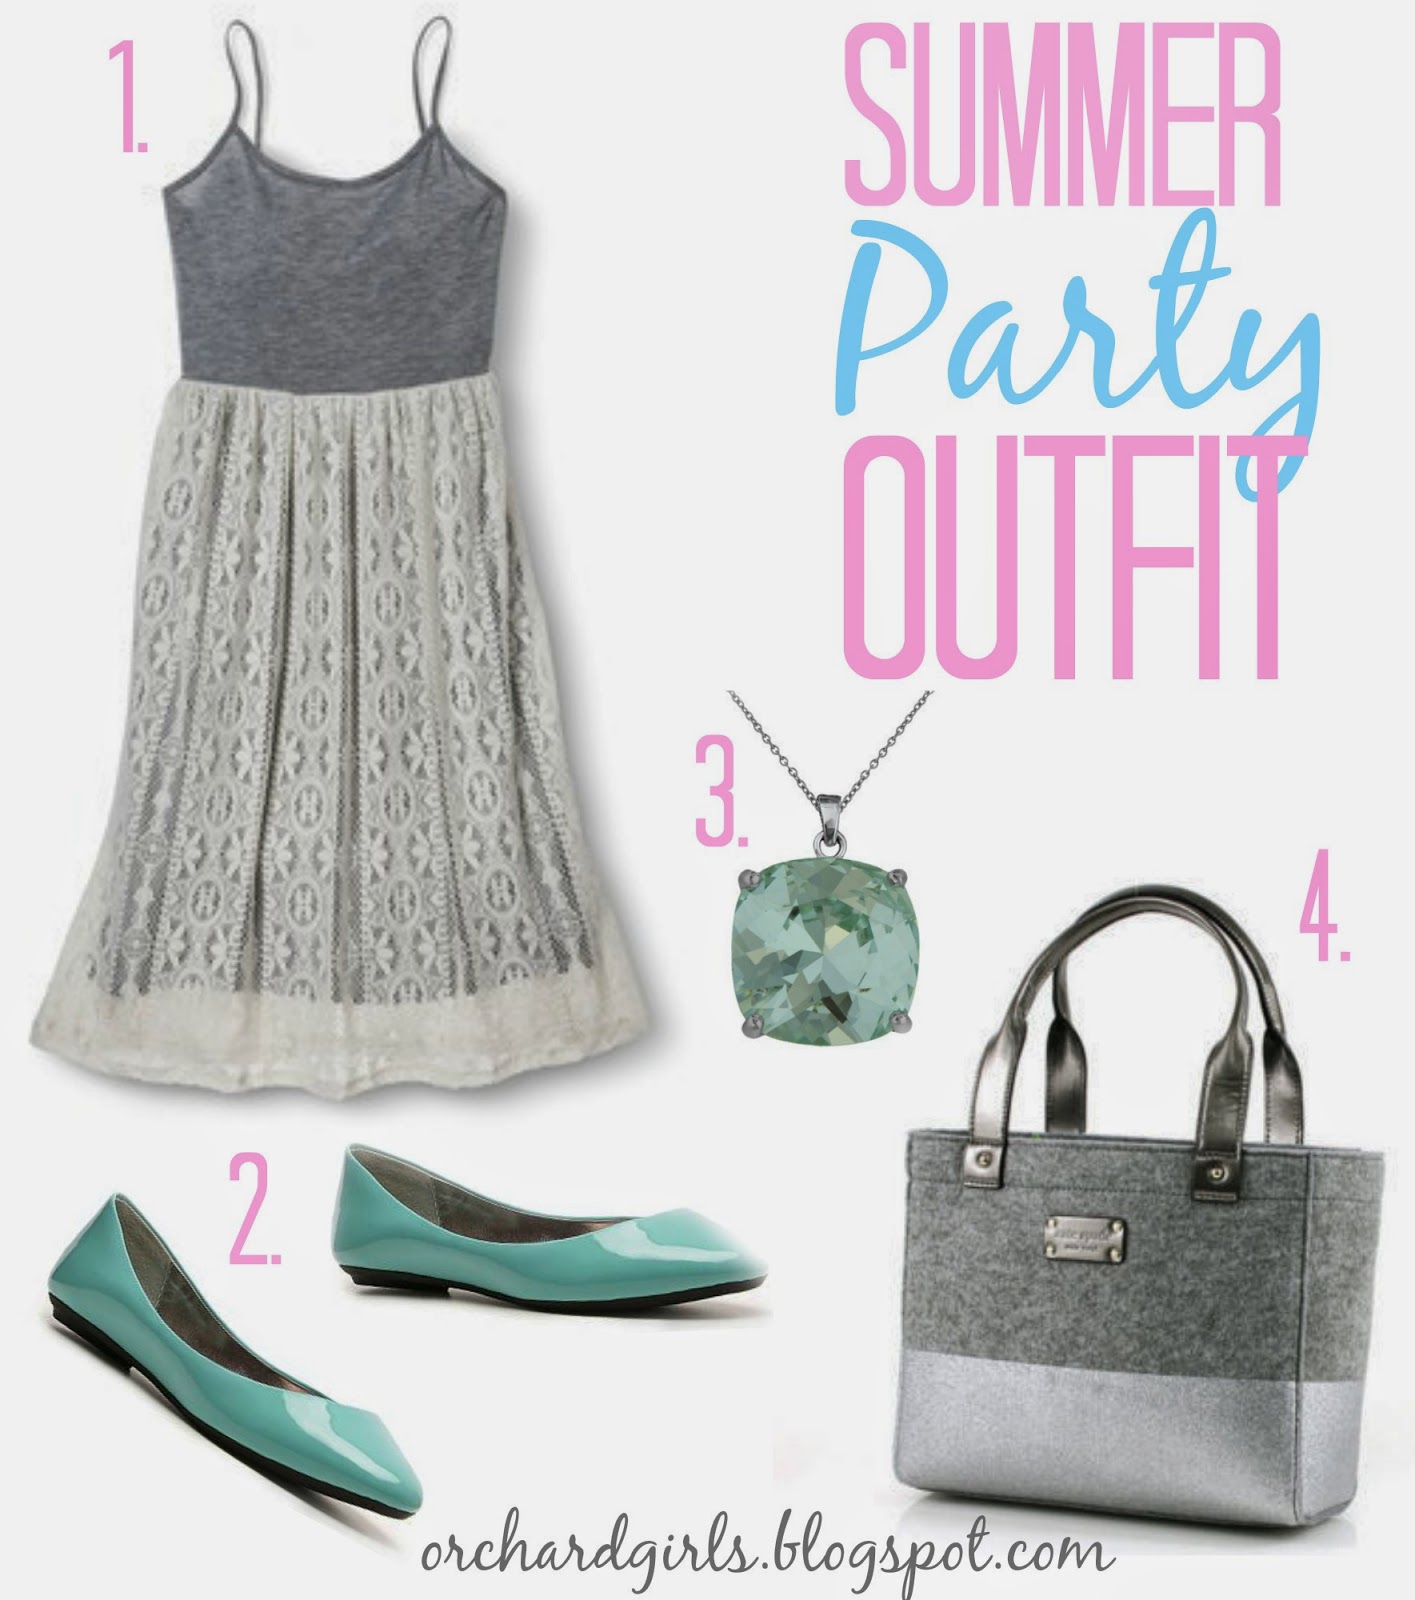 Summer Party Outfit by Orchard Girls #summer #party #inspiration